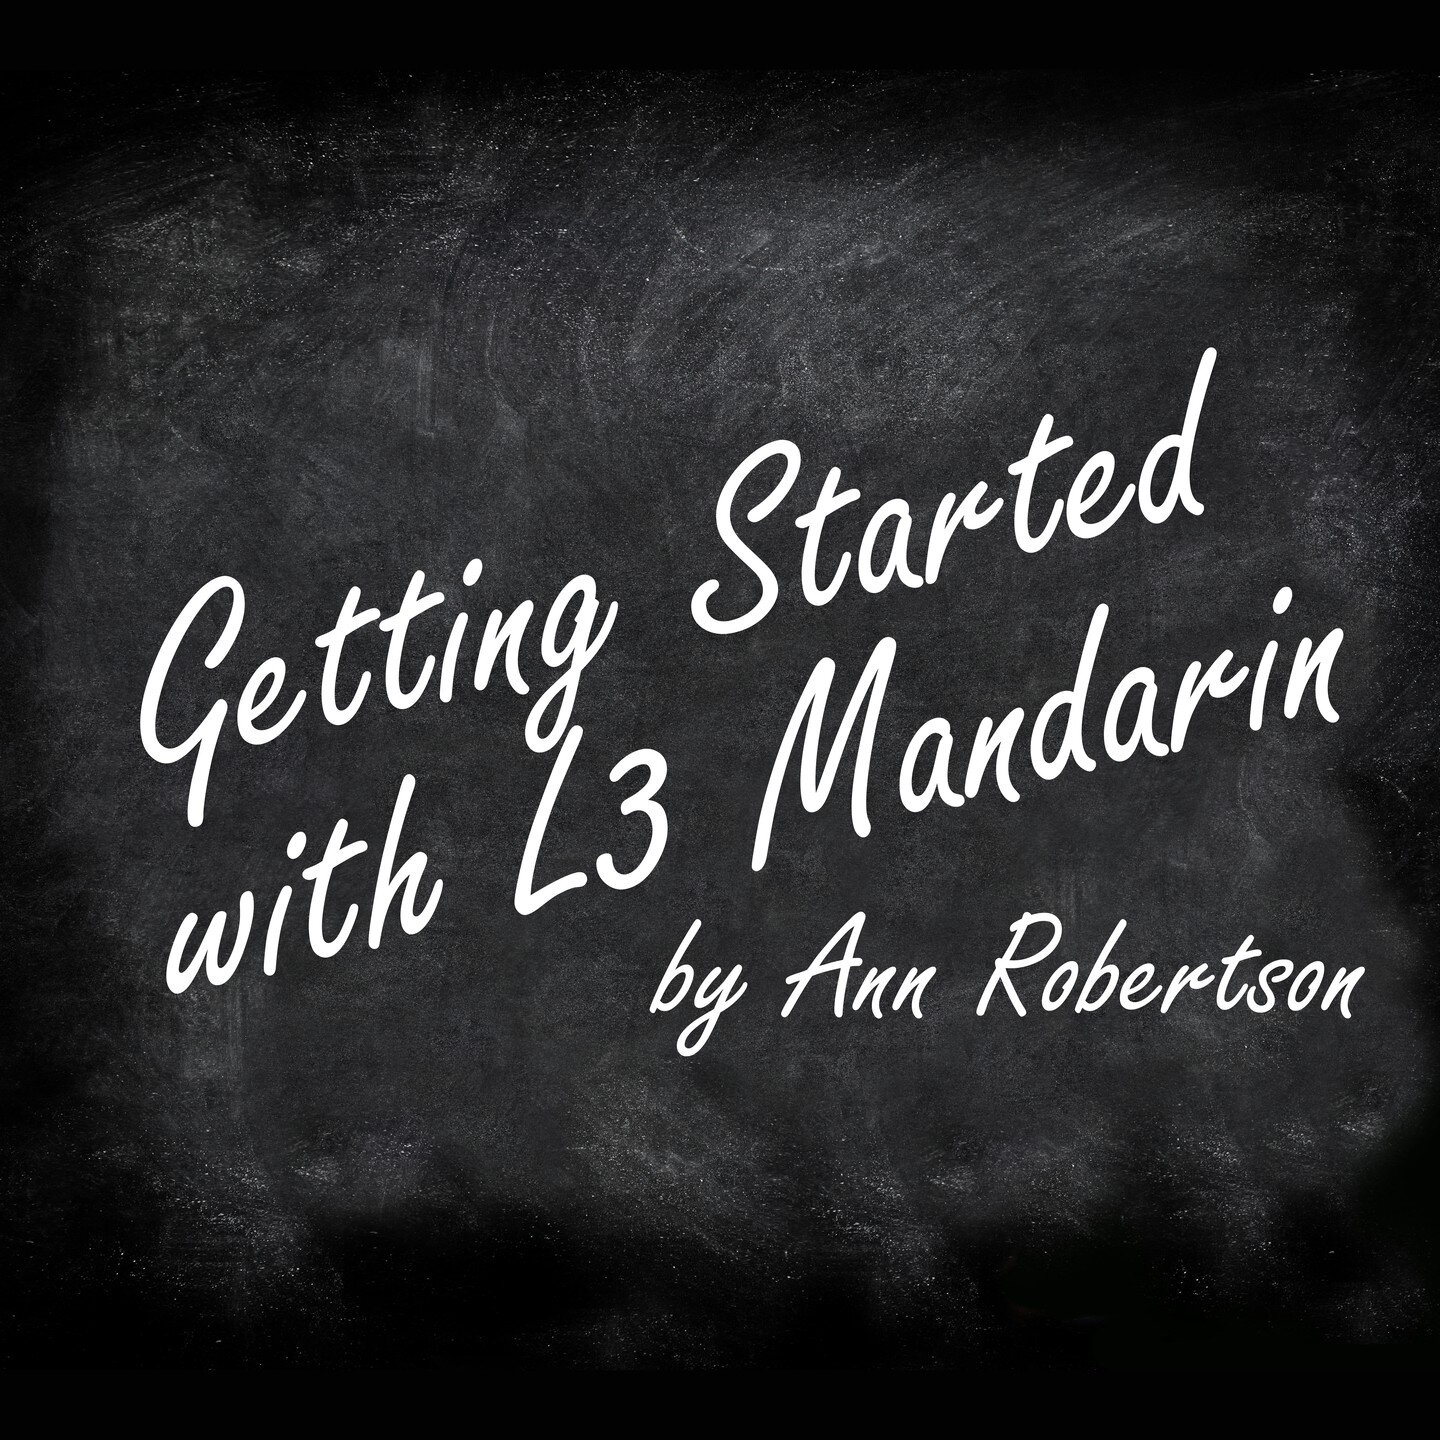 A new CPD article on L3 Mandarin is now on our website, written by Ann Robertson. Have a look at our Teaching Zone for more articles and resources. #cpd #continuingprofessionaldevelopment #L3Mandarin #Chinese #Languageteaching #languagelearning